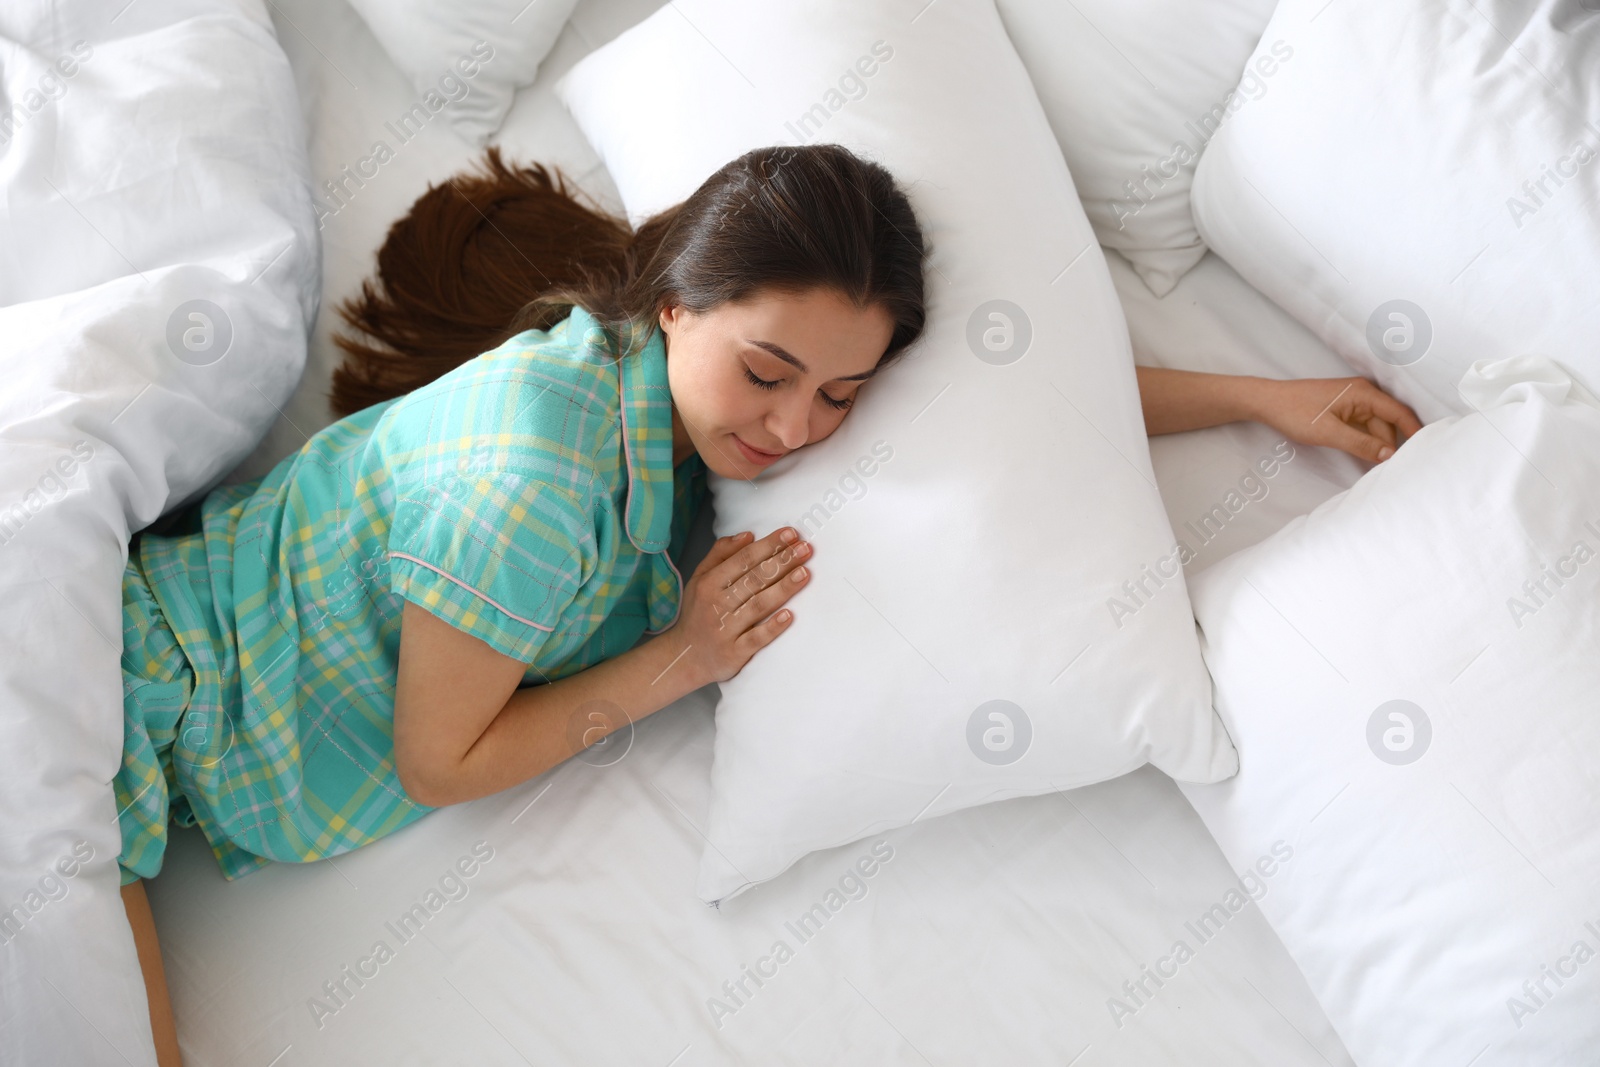 Photo of Portrait of beautiful young woman sleeping in large bed, above view